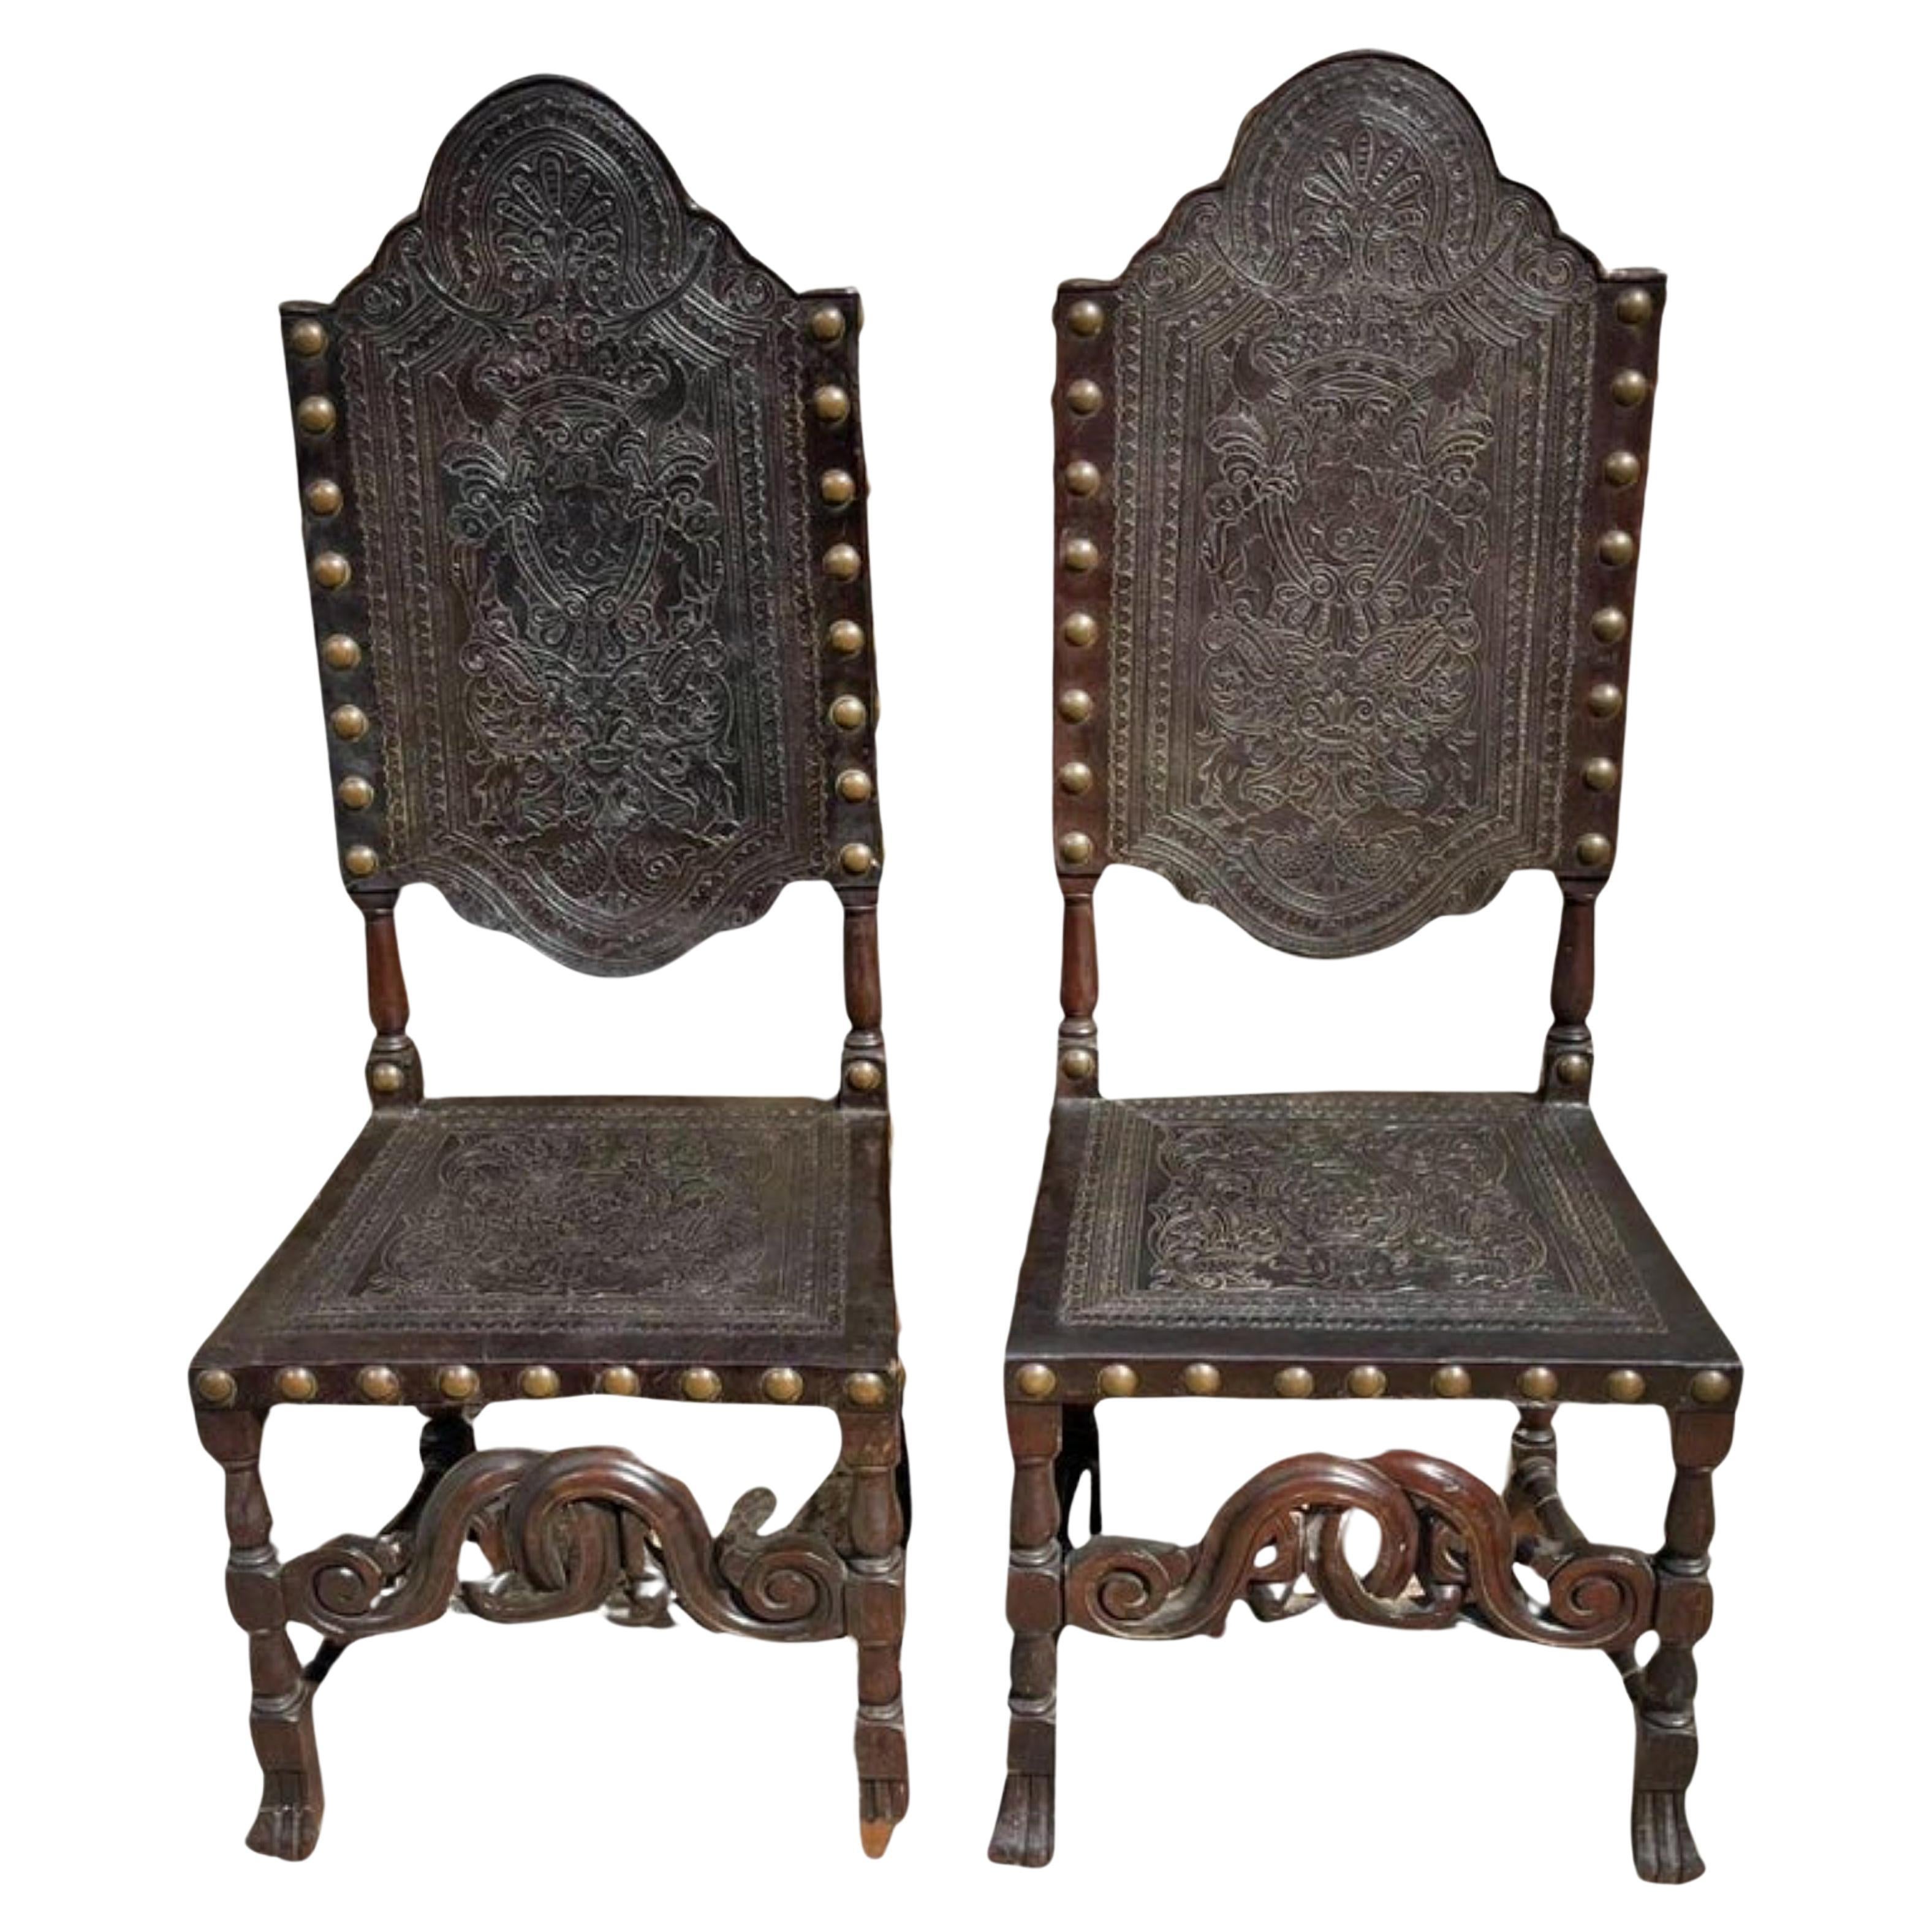 Portuguese Pair of High-Backed Chairs, 18th Century For Sale